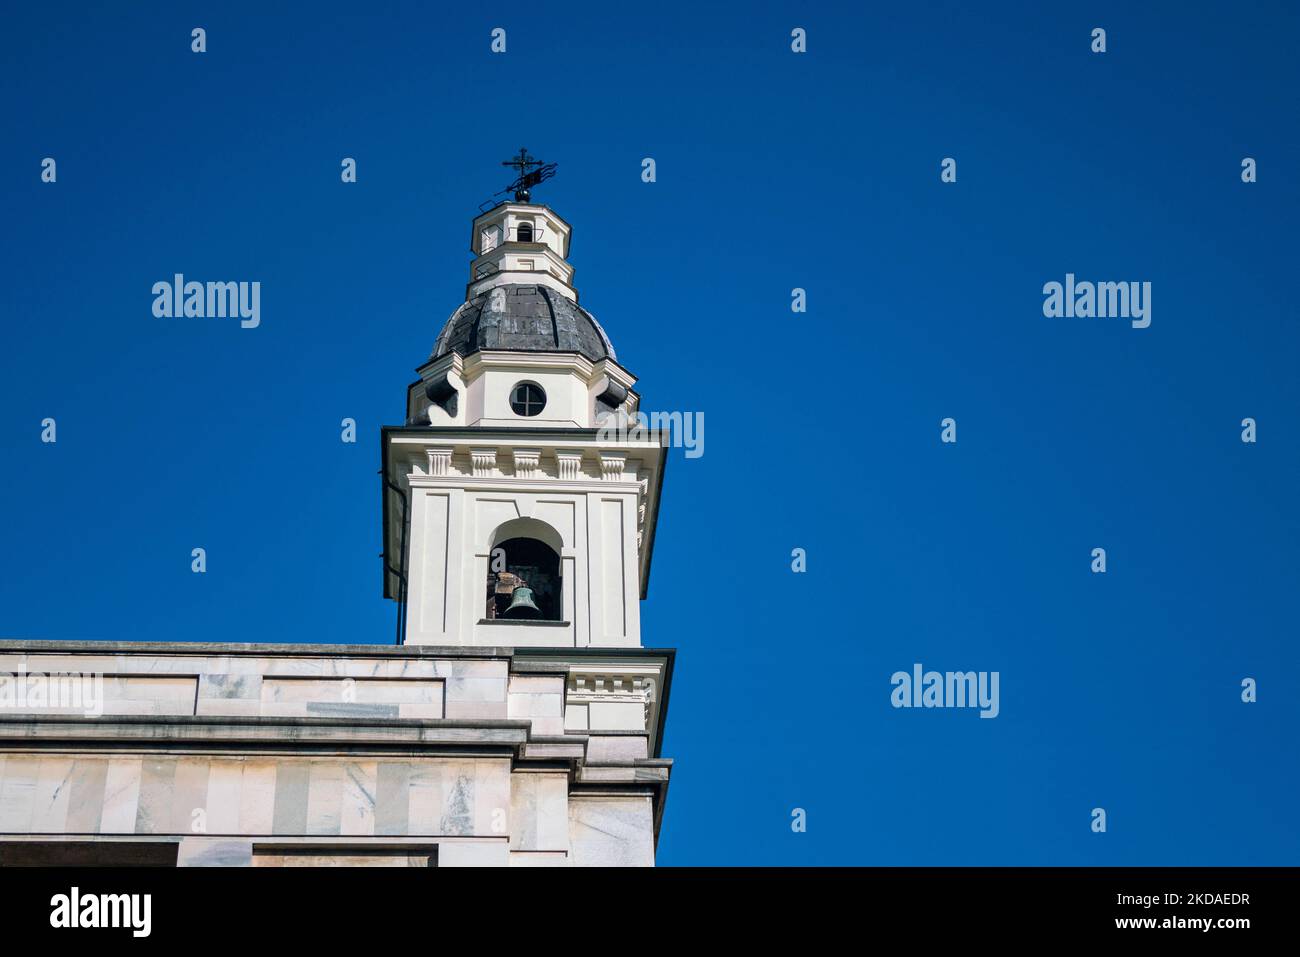 architecture: bell tower in the sky, exposed baroque bell tower and dome with cross and weather vane. Stock Photo